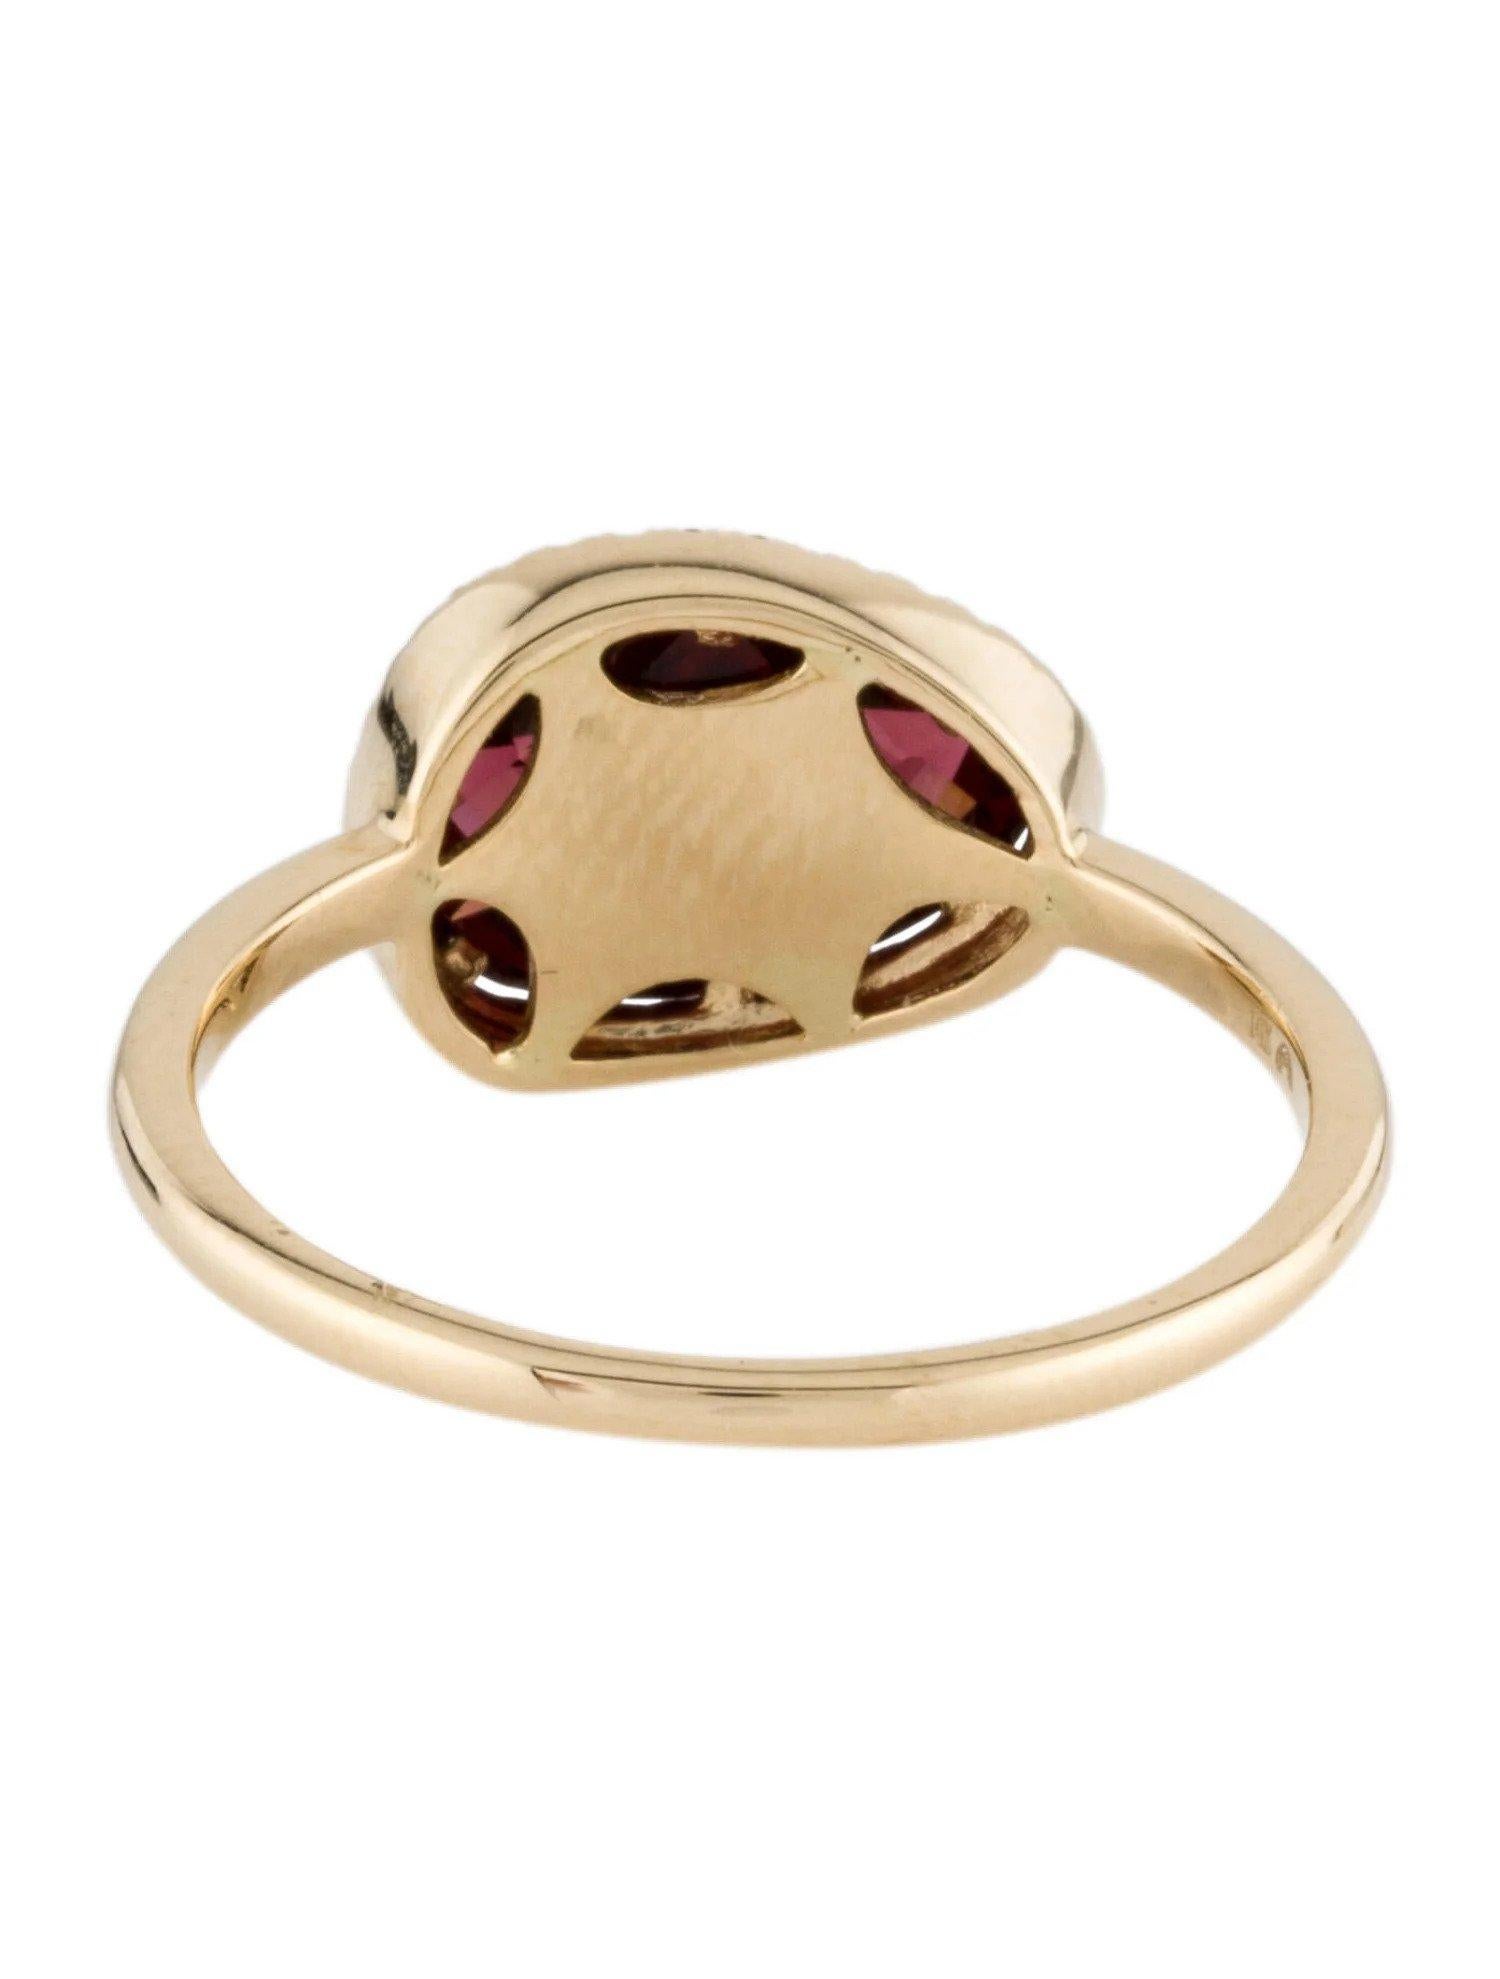 2.84 Carat Garnet & Diamond Yellow Gold Ring In New Condition For Sale In Great Neck, NY